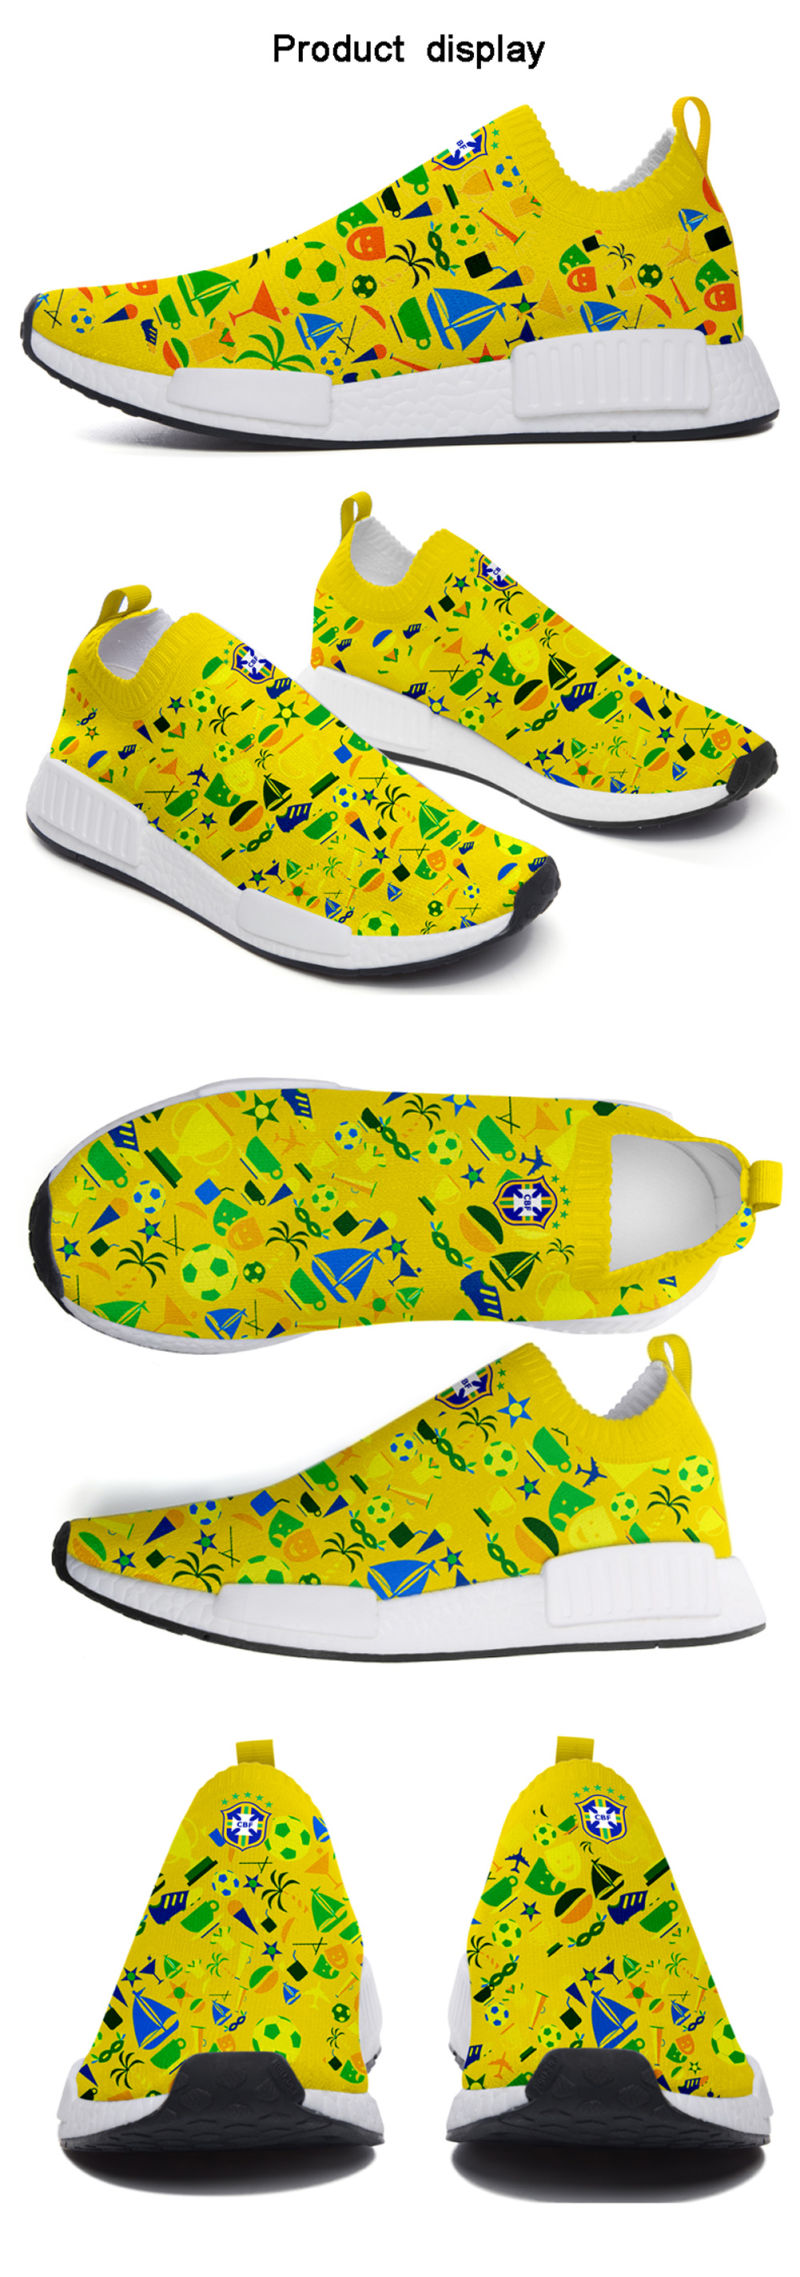 Custom Nmd Shoes From Factory Directly for 2018 World Cup Brazil Team